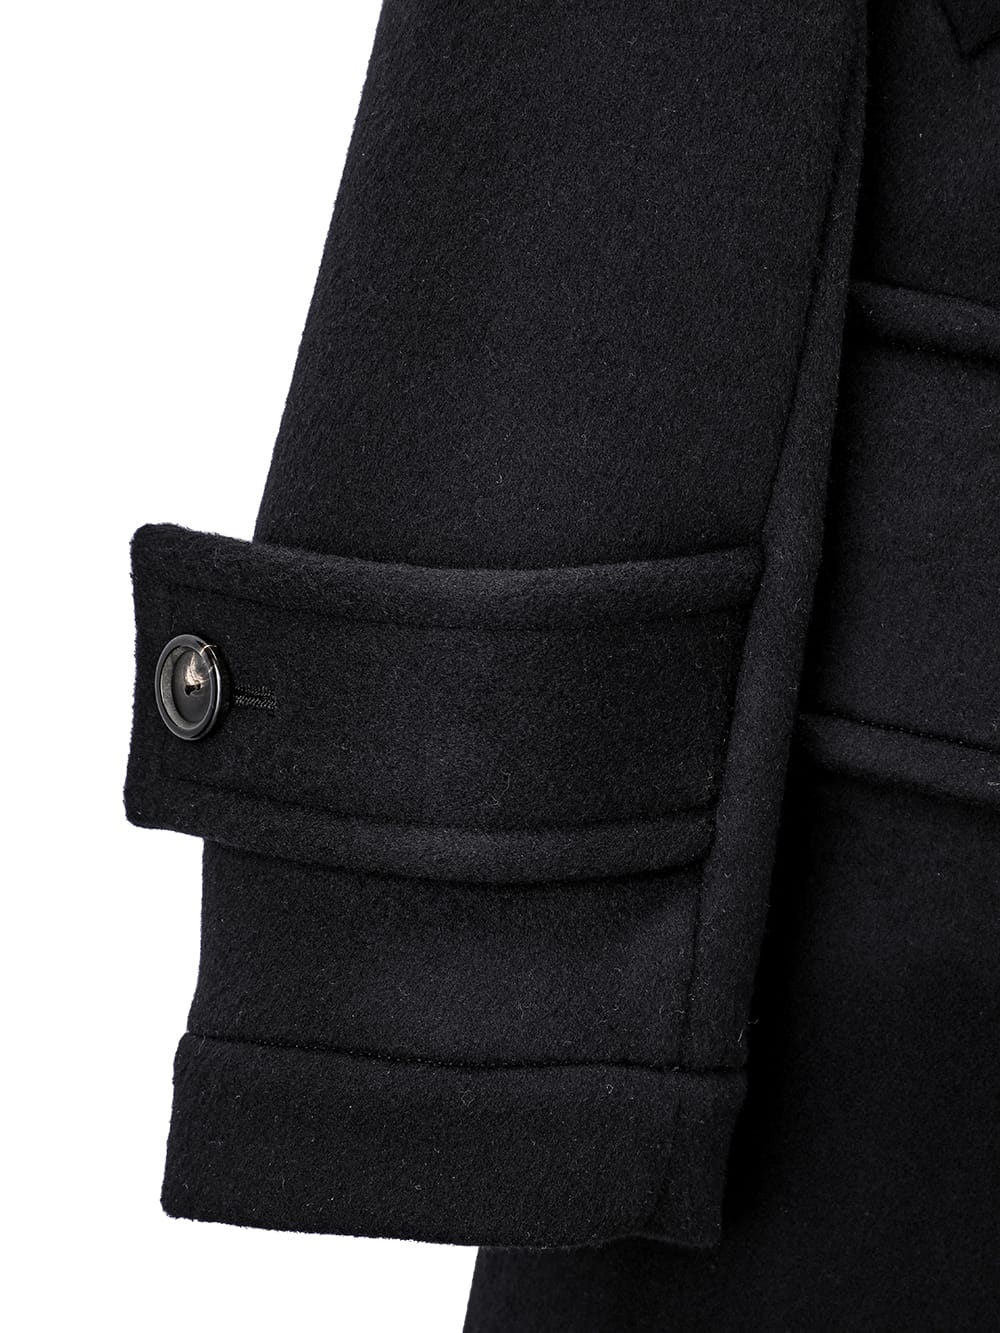 right - left pencil silhouette double-breasted pea coat